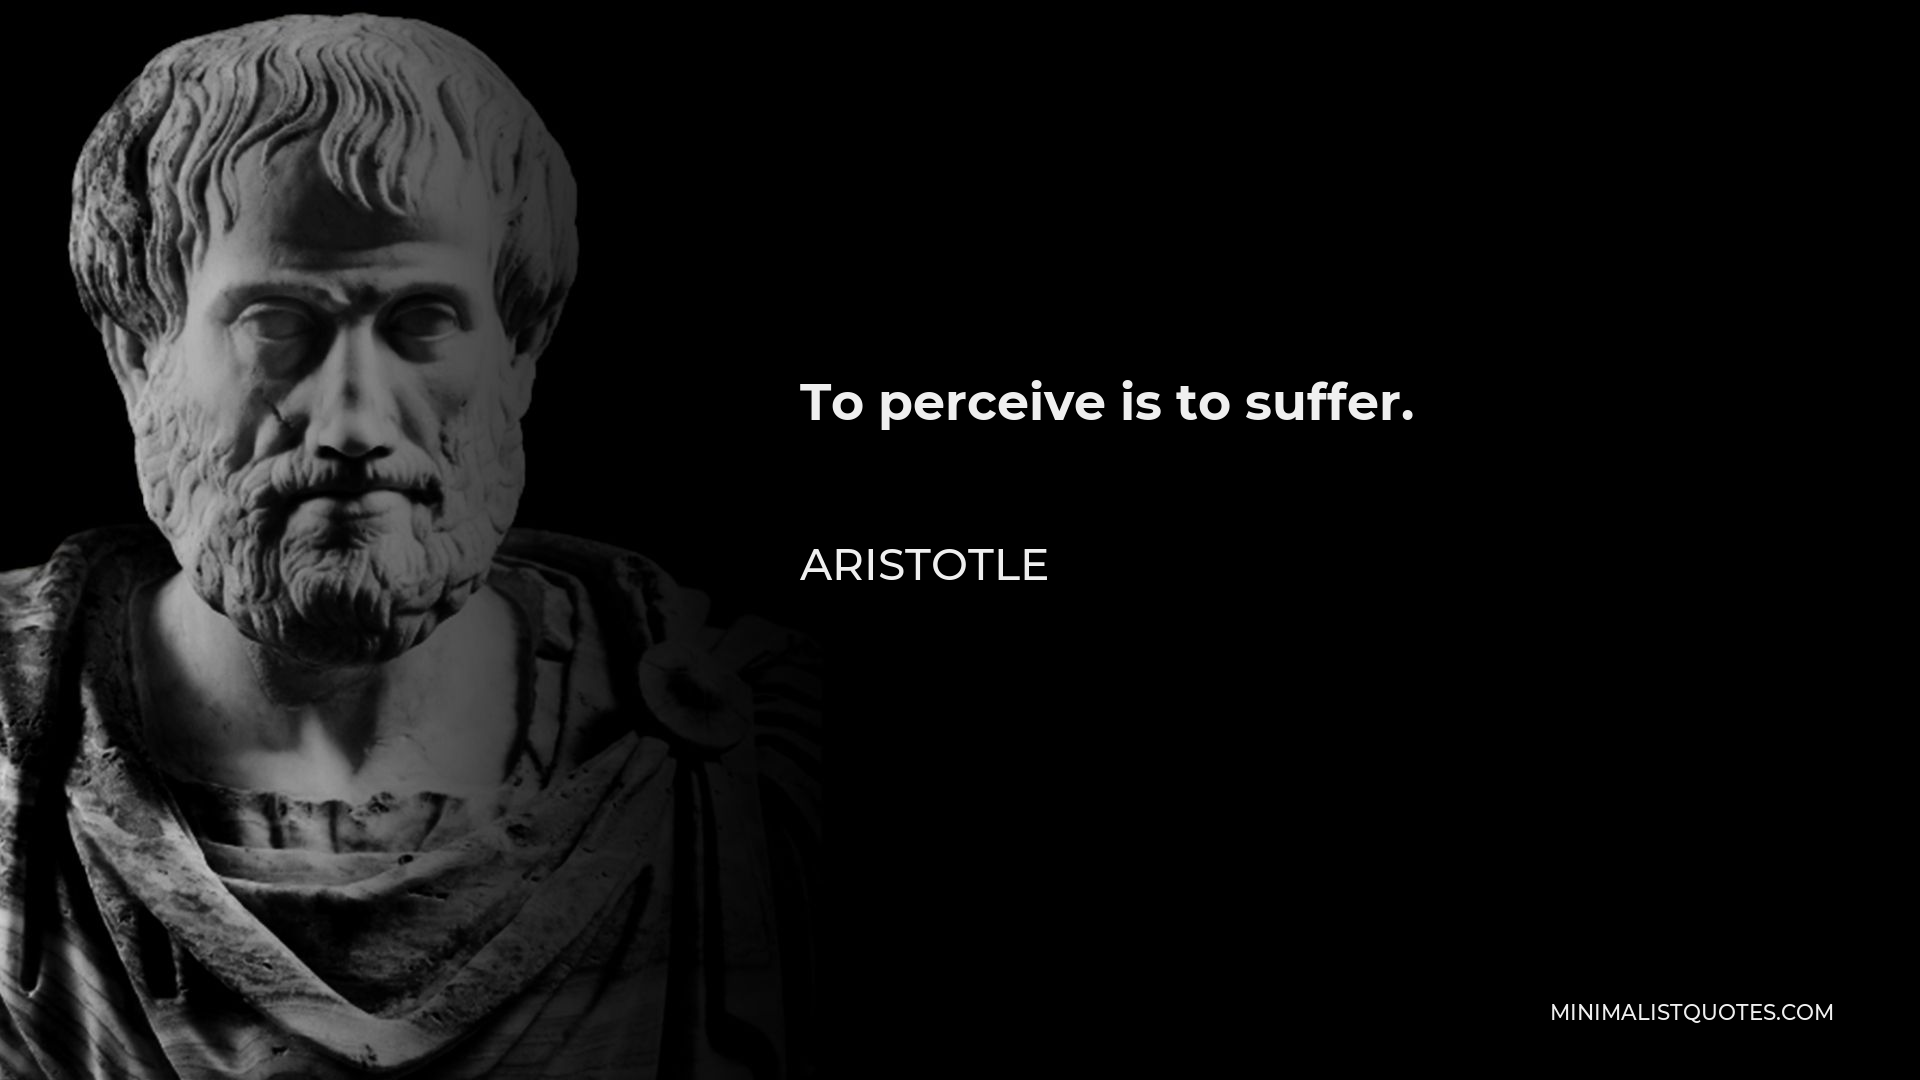 Aristotle Quote - To perceive is to suffer.